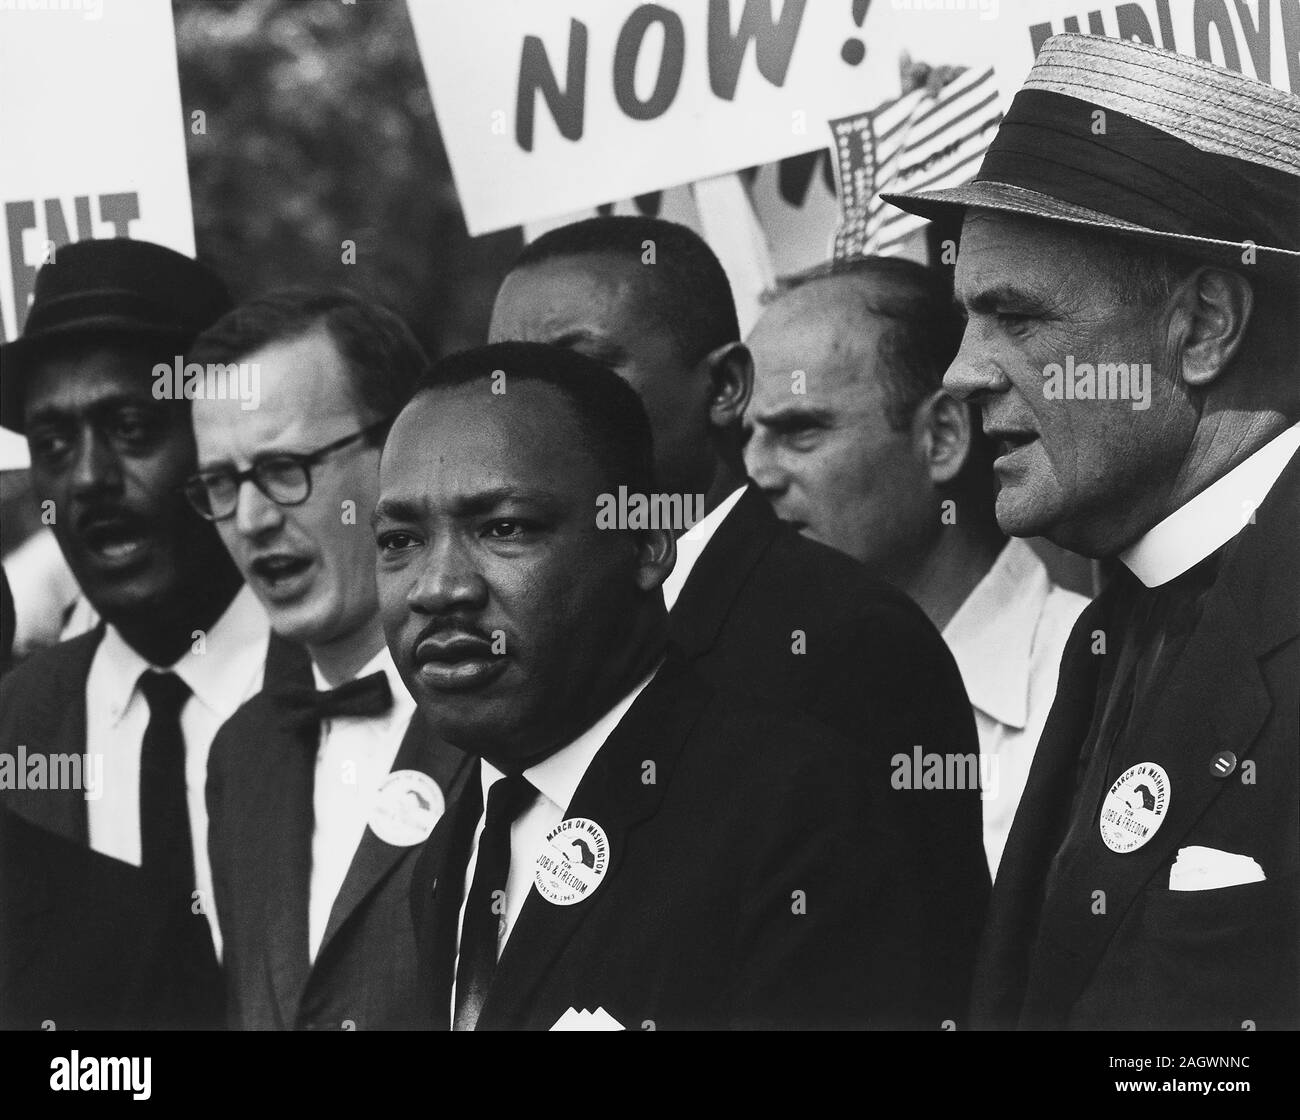 Martin Luther King Jr.at the civil rights march on Washington. Martin Luther King Jr. (January 15, 1929 – April 4, 1968) was an American Christian minister and activist who became the most visible spokesperson and leader in the Civil Rights Movement from 1955 until his assassination in 1968. Born in Atlanta, Georgia, King is best known for advancing civil rights through nonviolence and civil disobedience, inspired by his Christian beliefs and the nonviolent activism of Mahatma Gandhi. Stock Photo